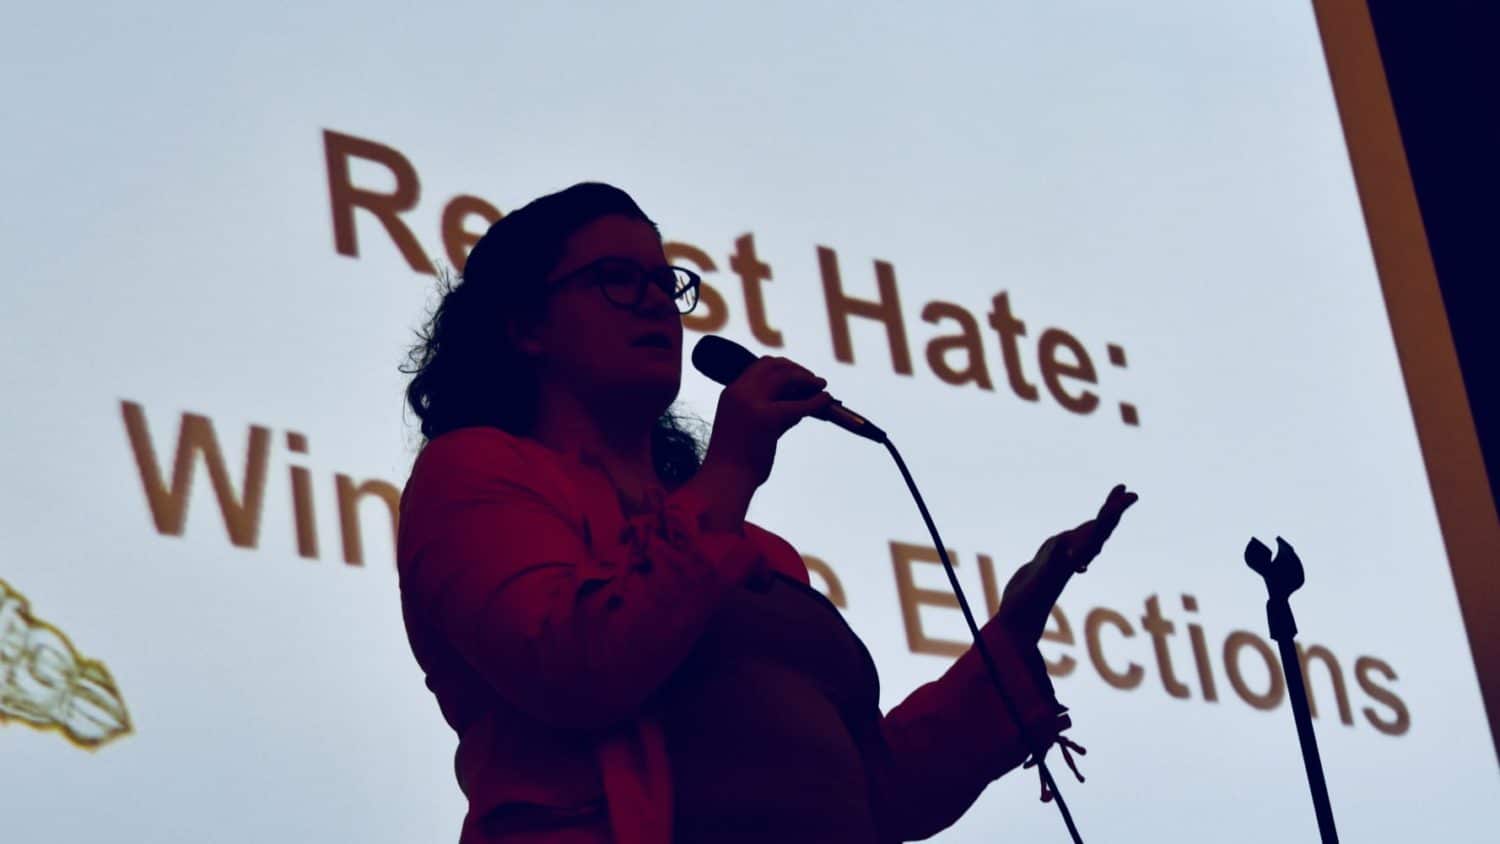 Rhode Island News: Resisting hate by winning some elections